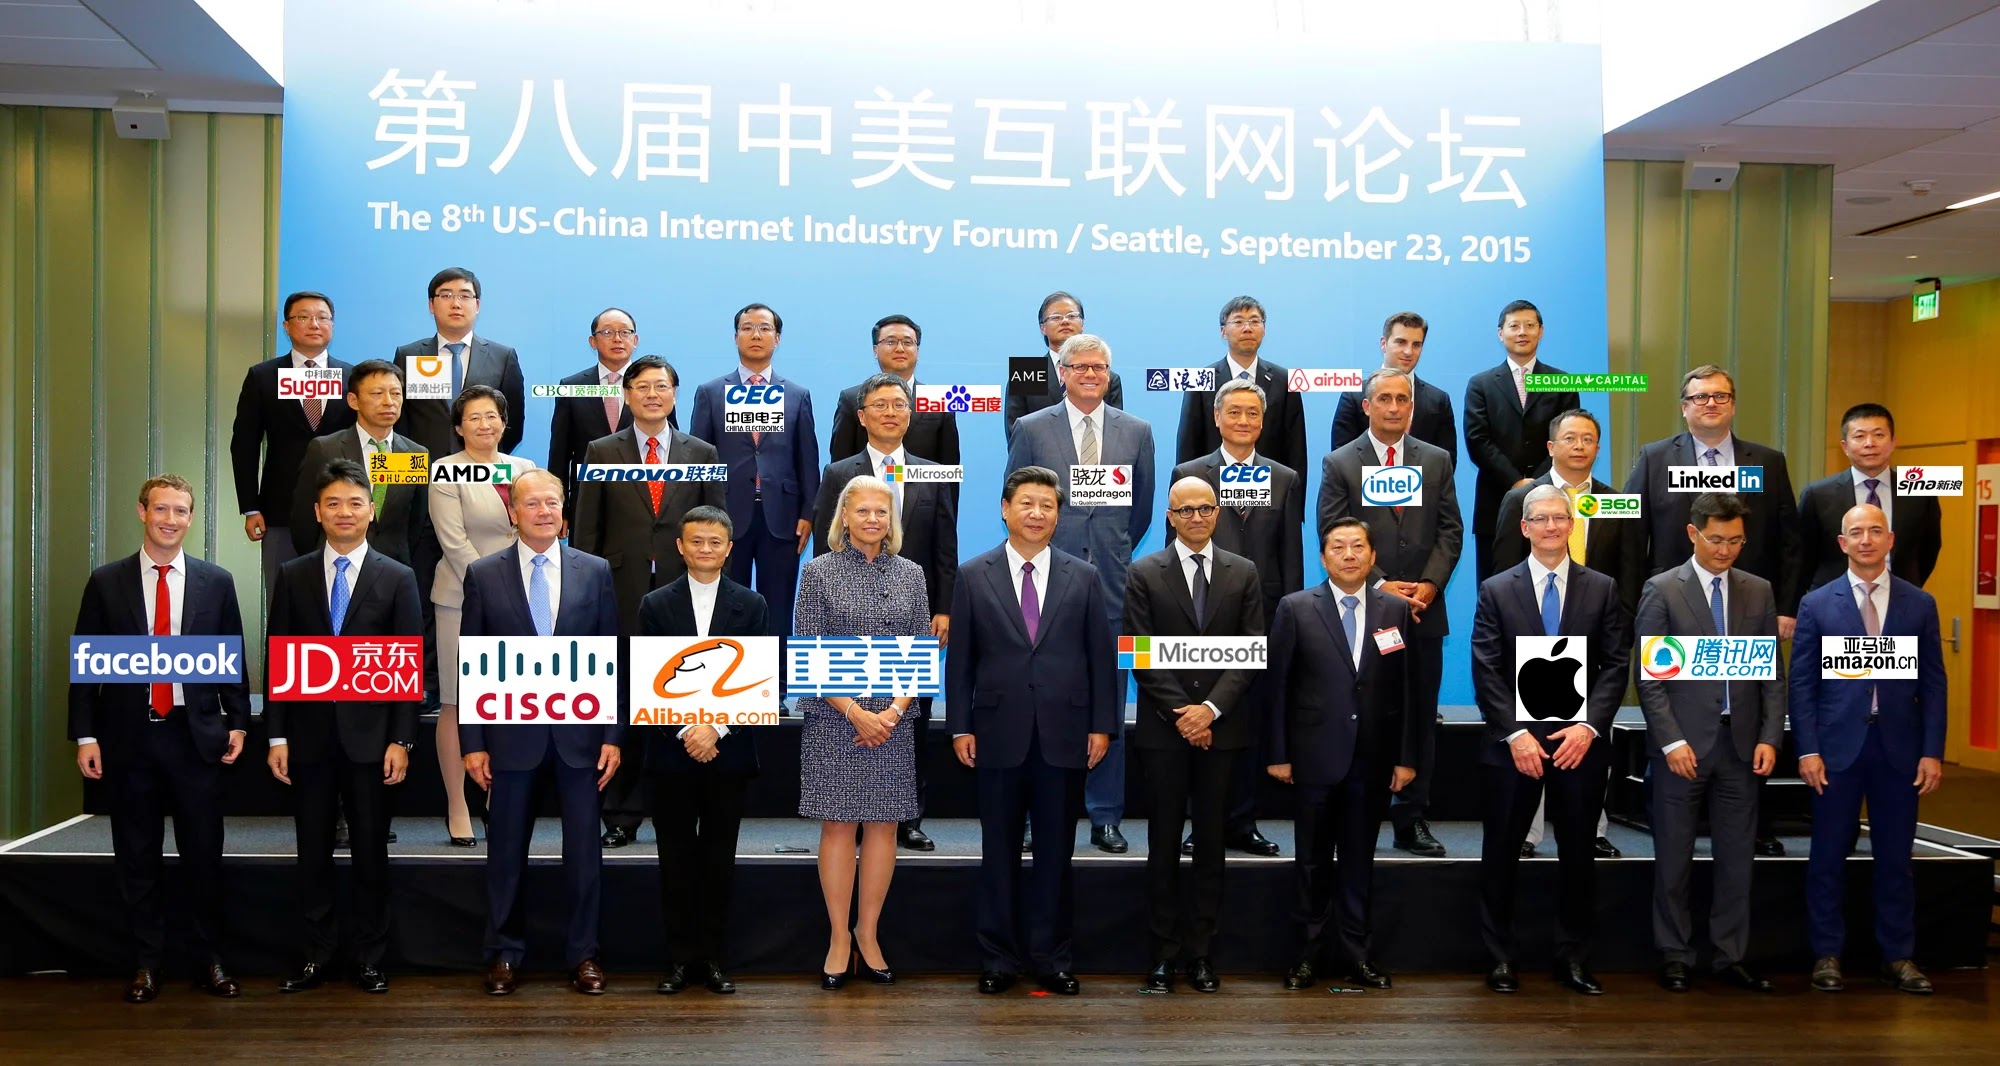 Front Row, L/R (Obama’s Technology Council): Mark Zuckerberg (Facebook), unknown, John Chambers (Cisco), Jack Ma (Alibaba), Virginia Marie 'Ginni' Rometty (IBM), Xi Jinping (Chinese Communist Party boss), Satya Nadella (Microsoft), unknown, Tim Cook (Apple), unknwn, Jeff Bezos (Amazon); Second Row: 2nd from right: Reid Hoffman (LinkedIn, Facebook); 4th from right: Intel.